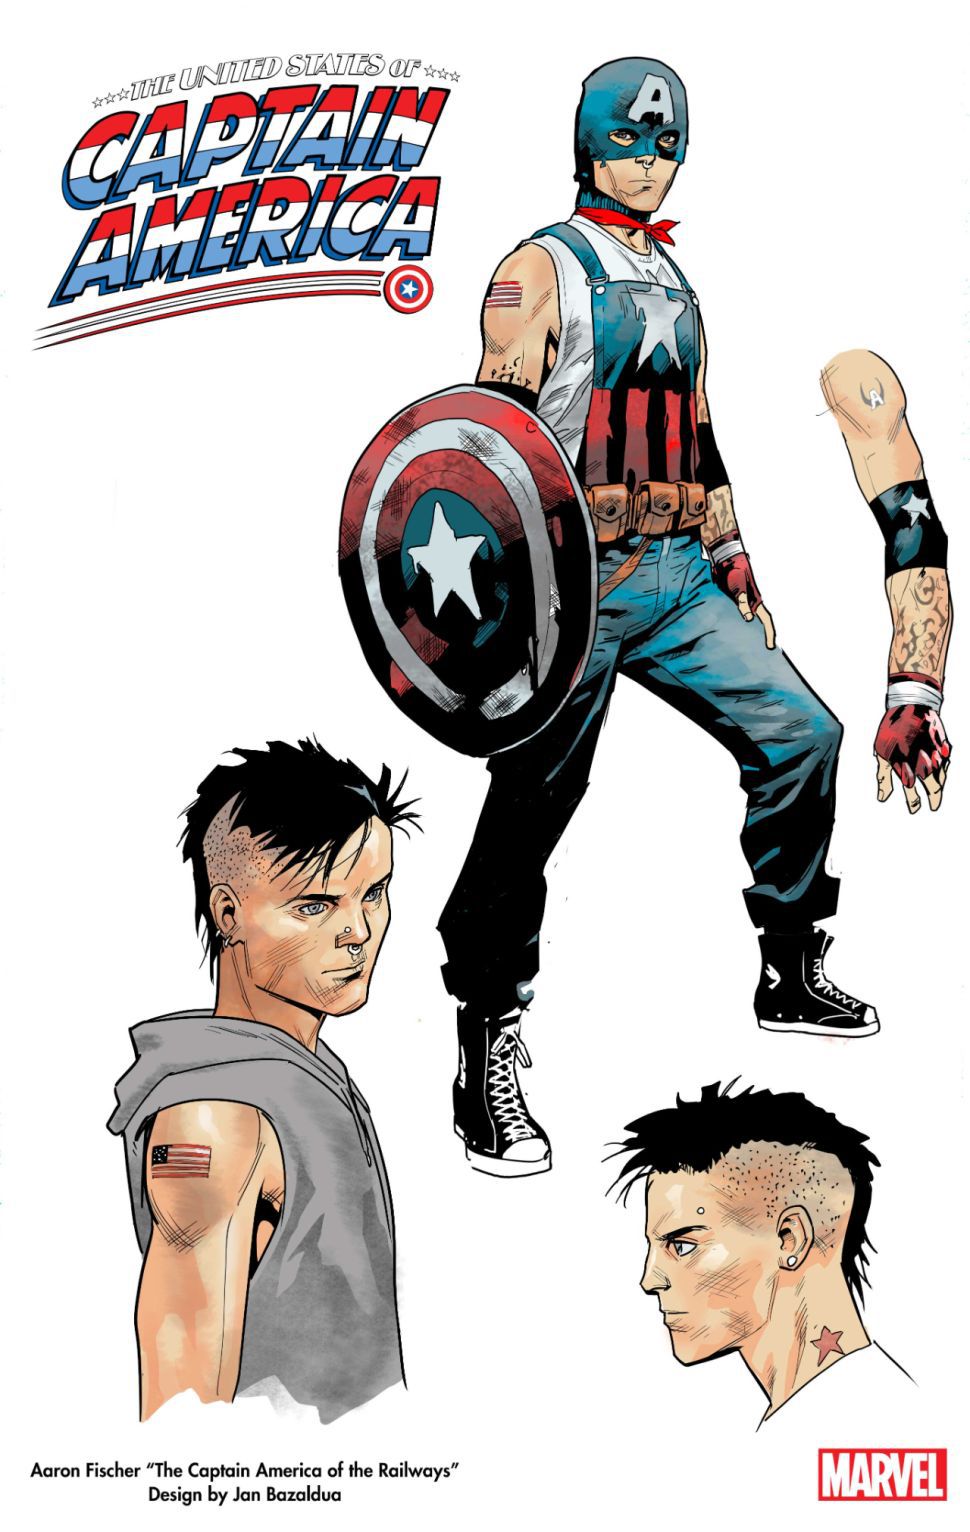 Character designs for Aaron Fischer/Captain America, wearing denim overalls painted with red Captain America strips and a white star, a blue hood tied around his head, and a pair of Converse high tops. His dark shaggy hair is shaved on both sides. 